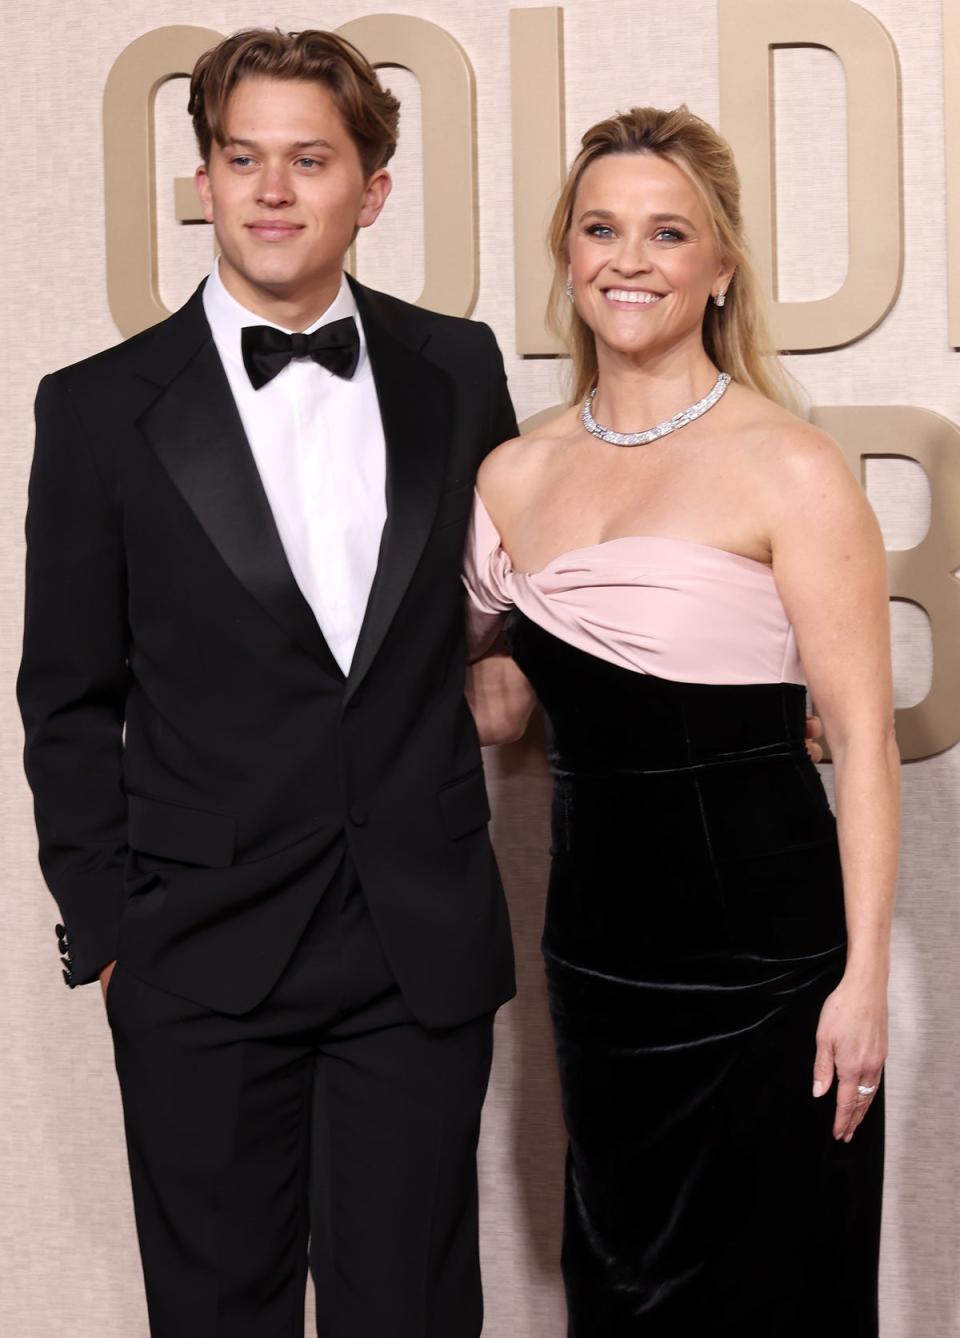 Reese Witherspoon with her son Deacon Reese Phillippe at the Golden Globes (Getty Images)